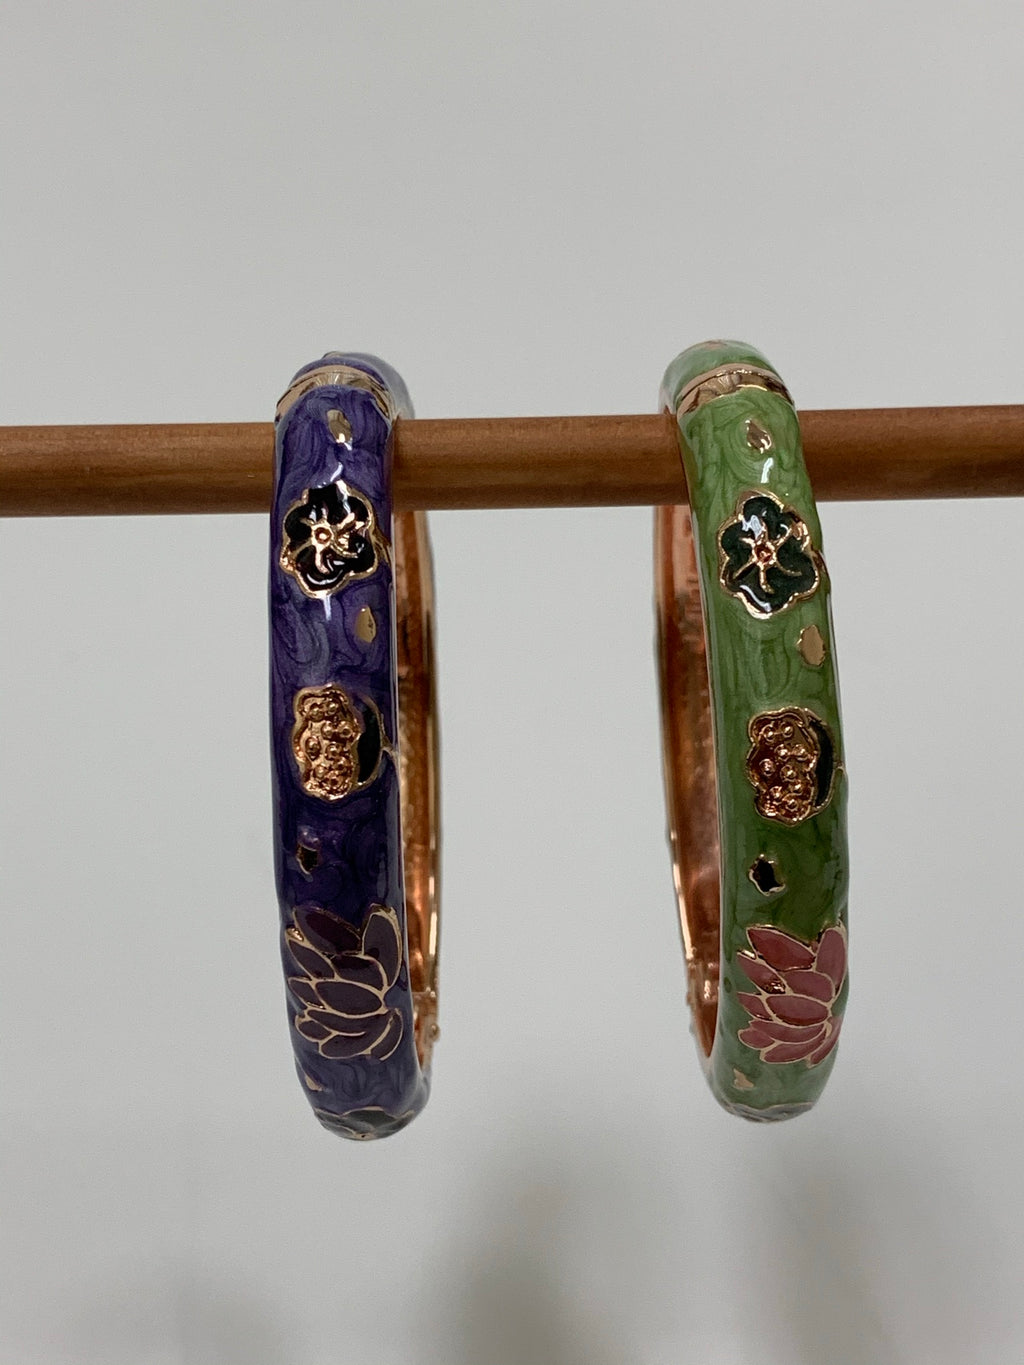 Set of 2 beautiful bangle bracelets (purple & green) with intricate metal work and enamel finish. Apparently when enamel is heated up to very high temperatures, it becomes "vibrant in color with a wonderful metallic finish." The design includes lovely lotus flowers. Lotus symbolizes purity, strength and enlightenment and reminds us that we all must move through the muck to reach the light ♥. See the other set in my store (black & red).